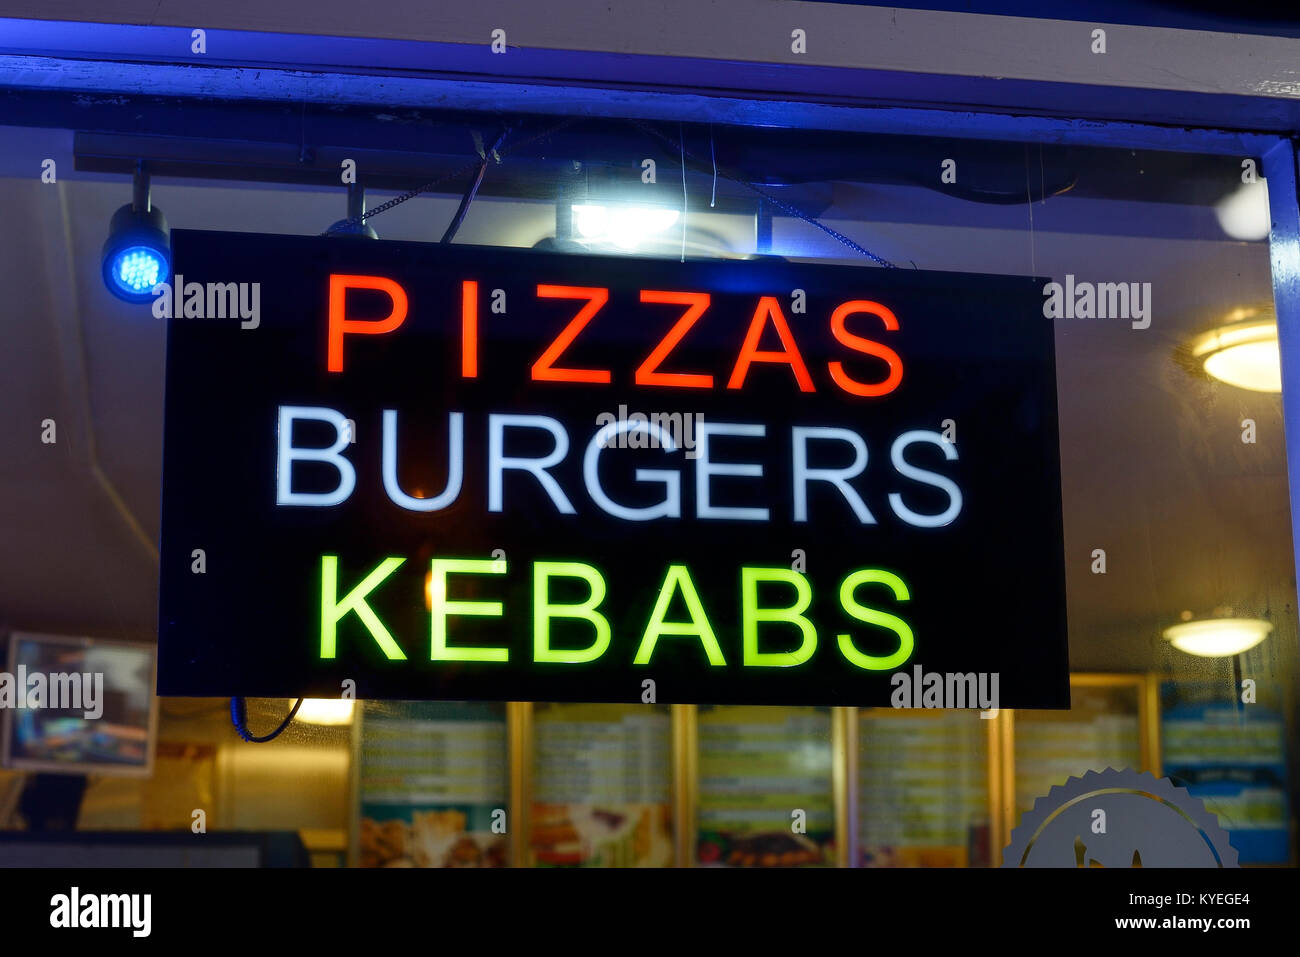 Pizzas Burgers Kebabs sign in the window of a takeaway restaurant Stock Photo